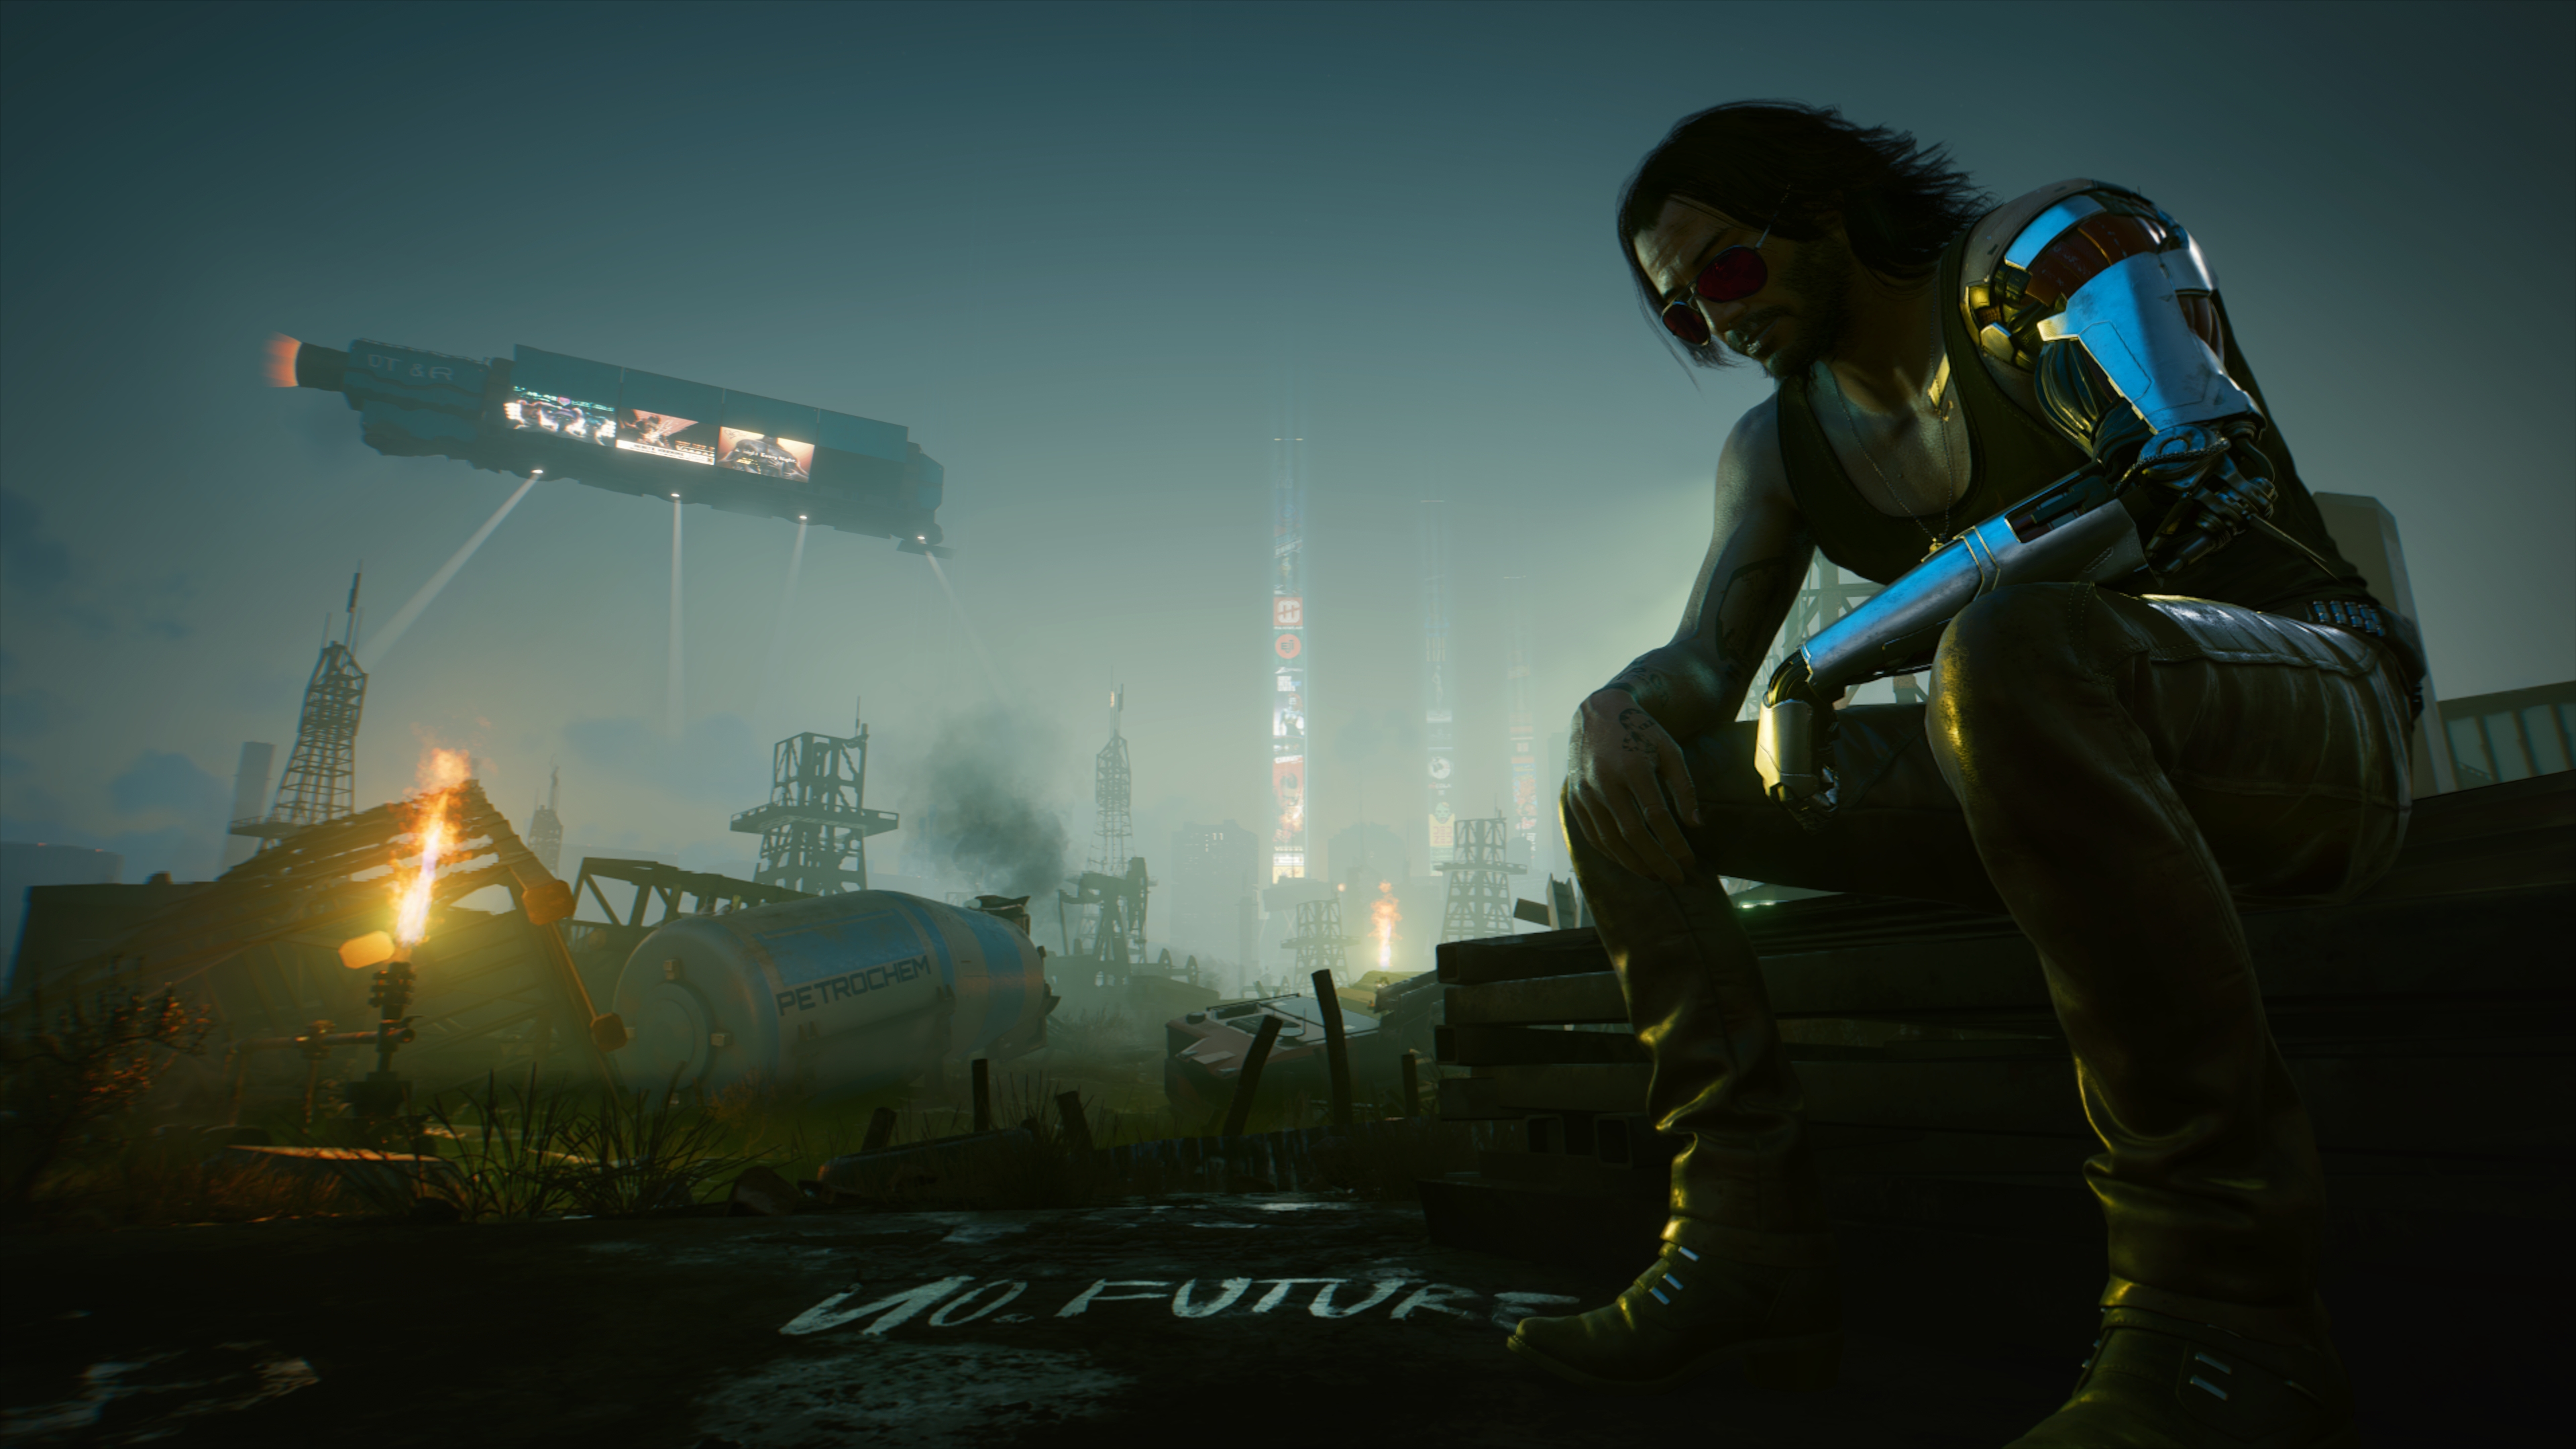 346849 Johnny Silverhand Cyberpunk 2077 Video Game Cosplay 4k  Rare  Gallery HD Wallpapers